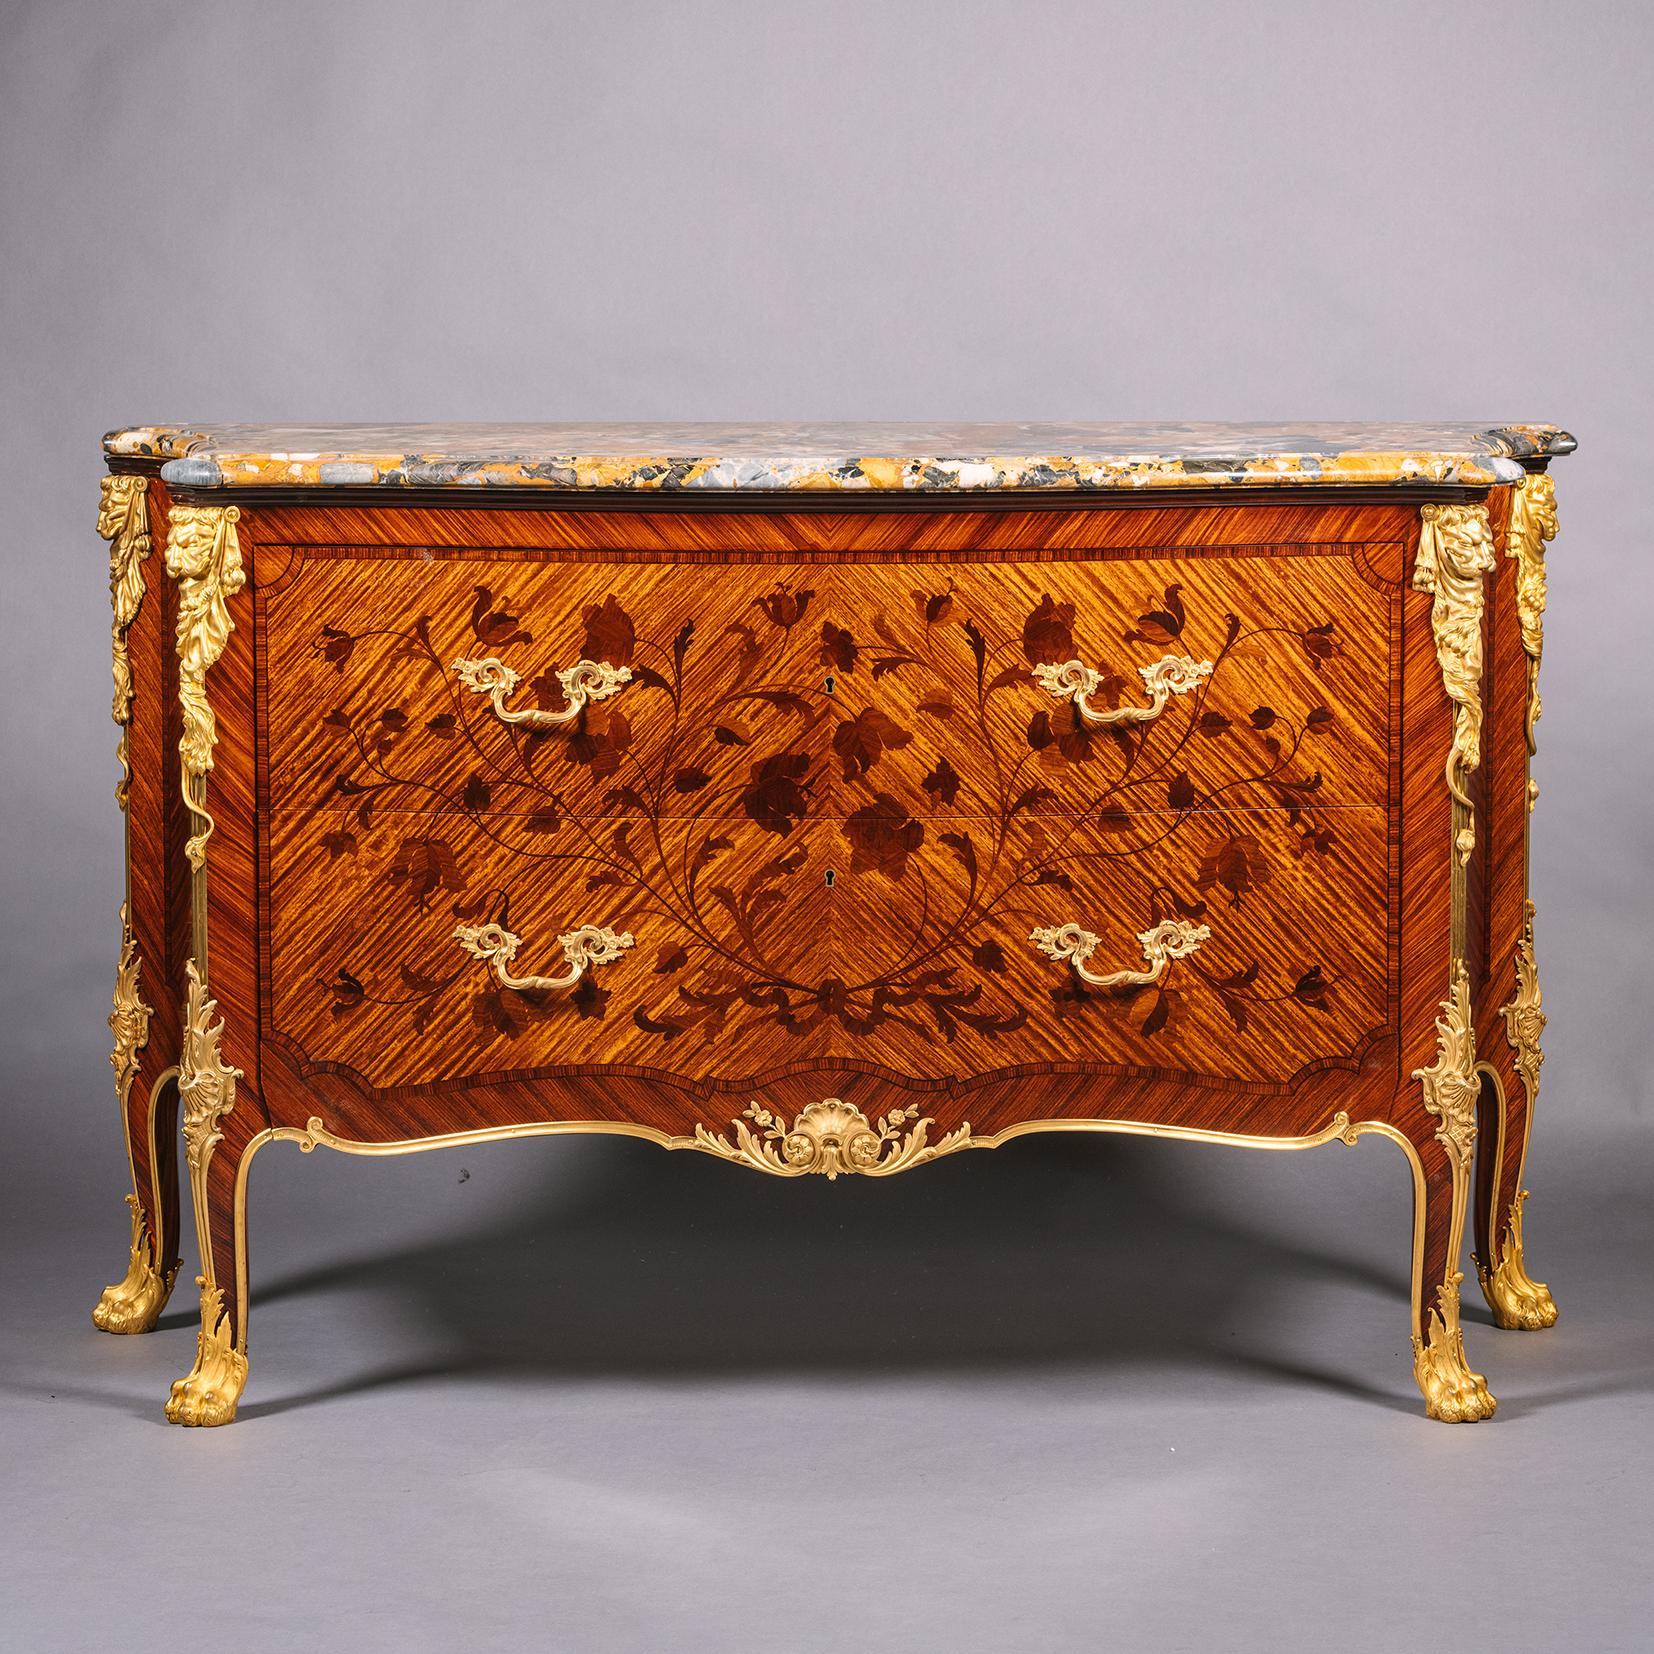 A Fine Gilt-Bronze Mounted Marquetry Commode, By Heinrich Pallenberg, Cologne. 

The original marble top is a rare yellow, black and grey brèche marble. This magnificent chest of drawers is fronted by two deep drawers decorated with superb bois de